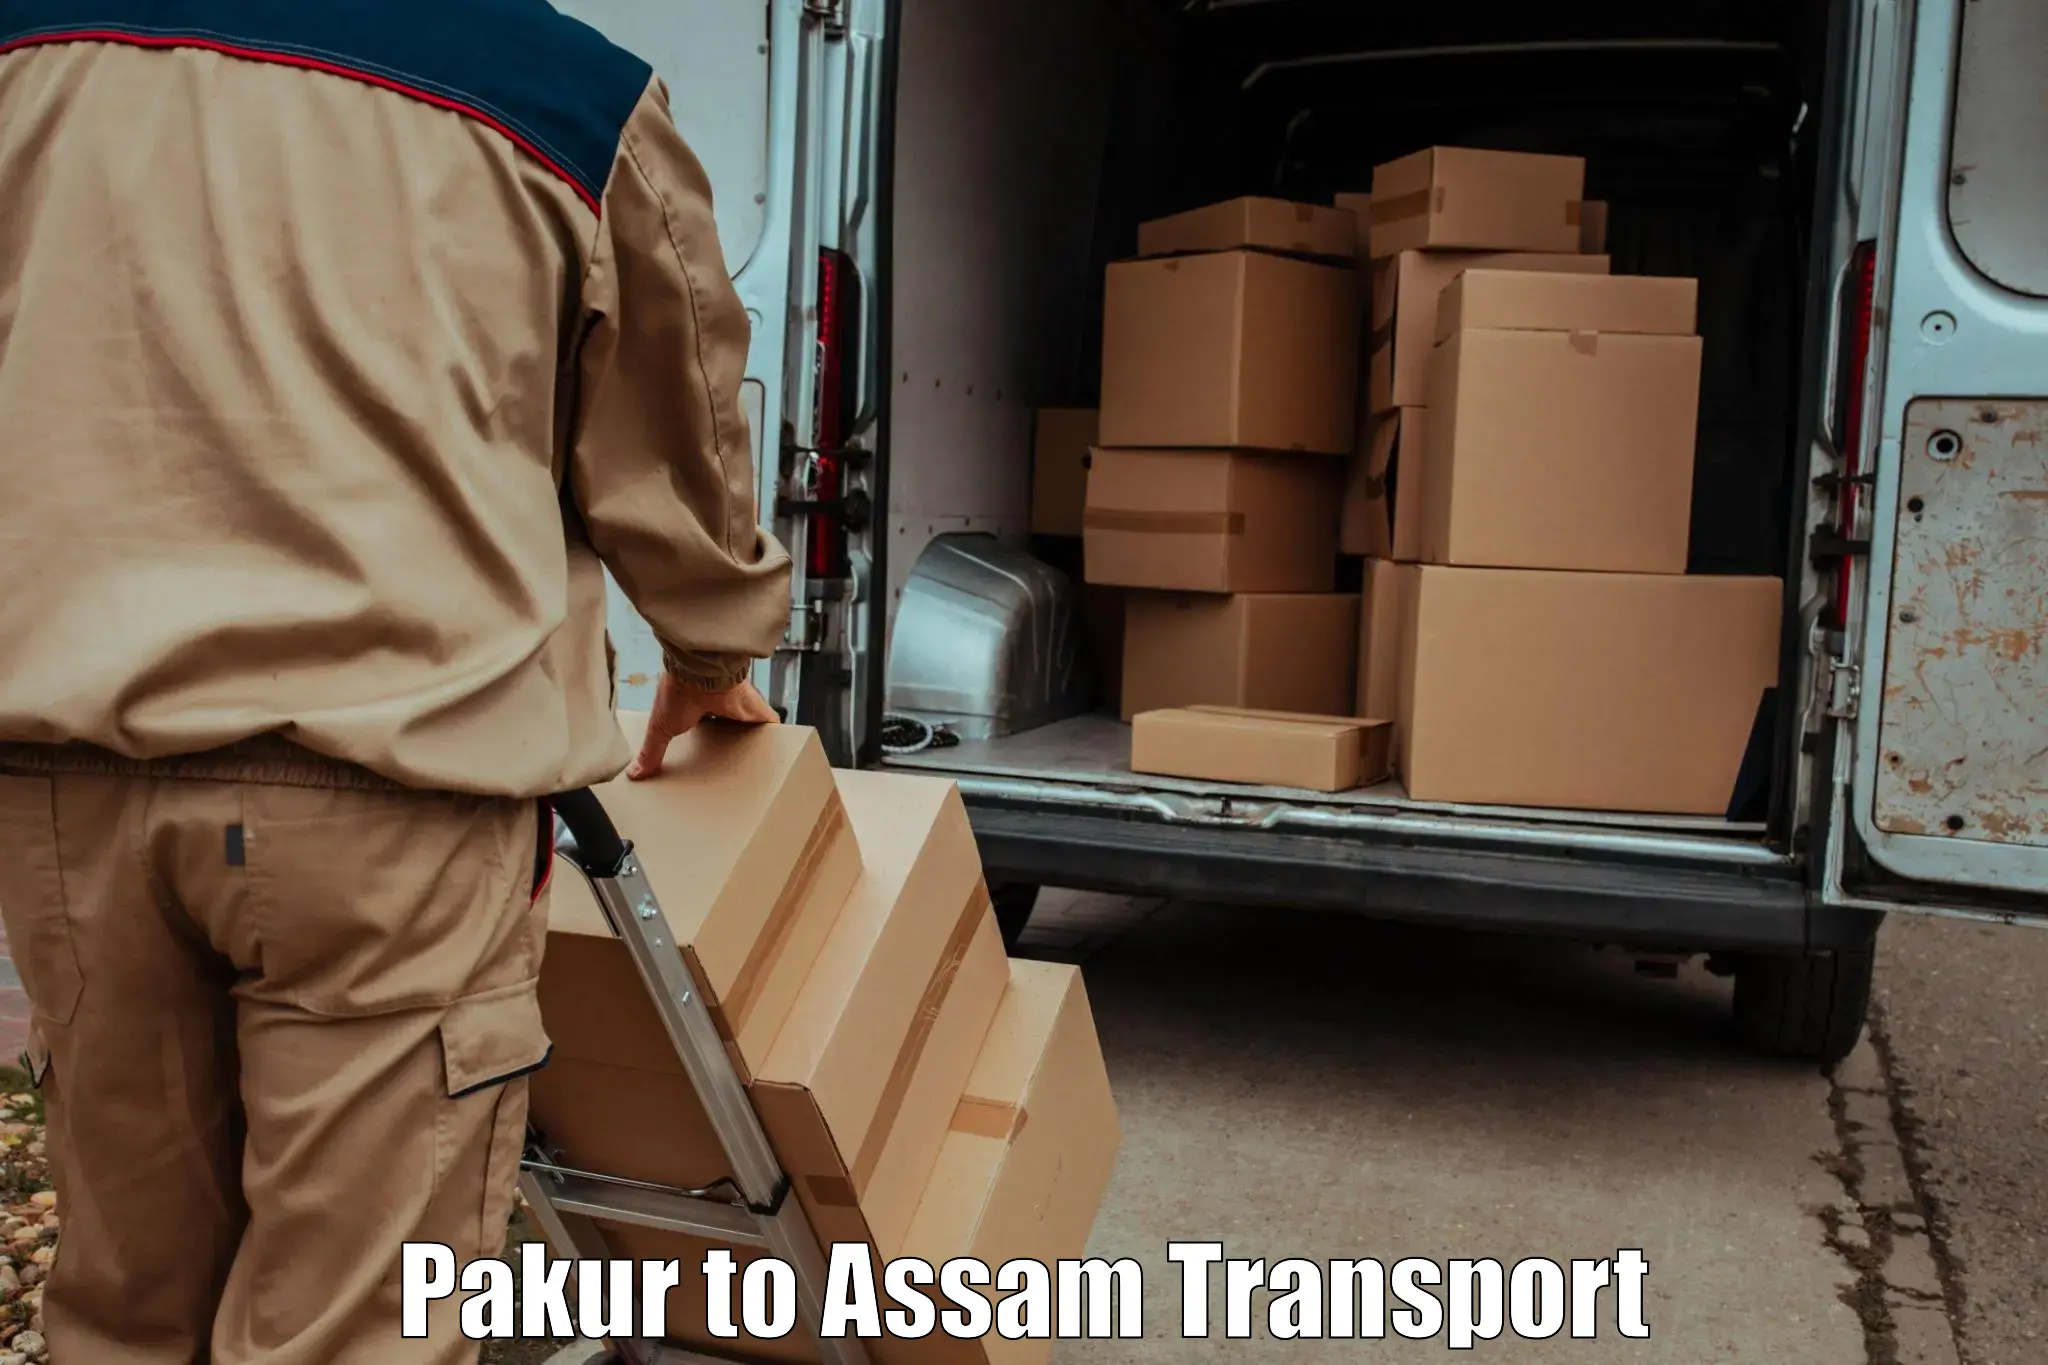 Door to door transport services Pakur to Silapathar